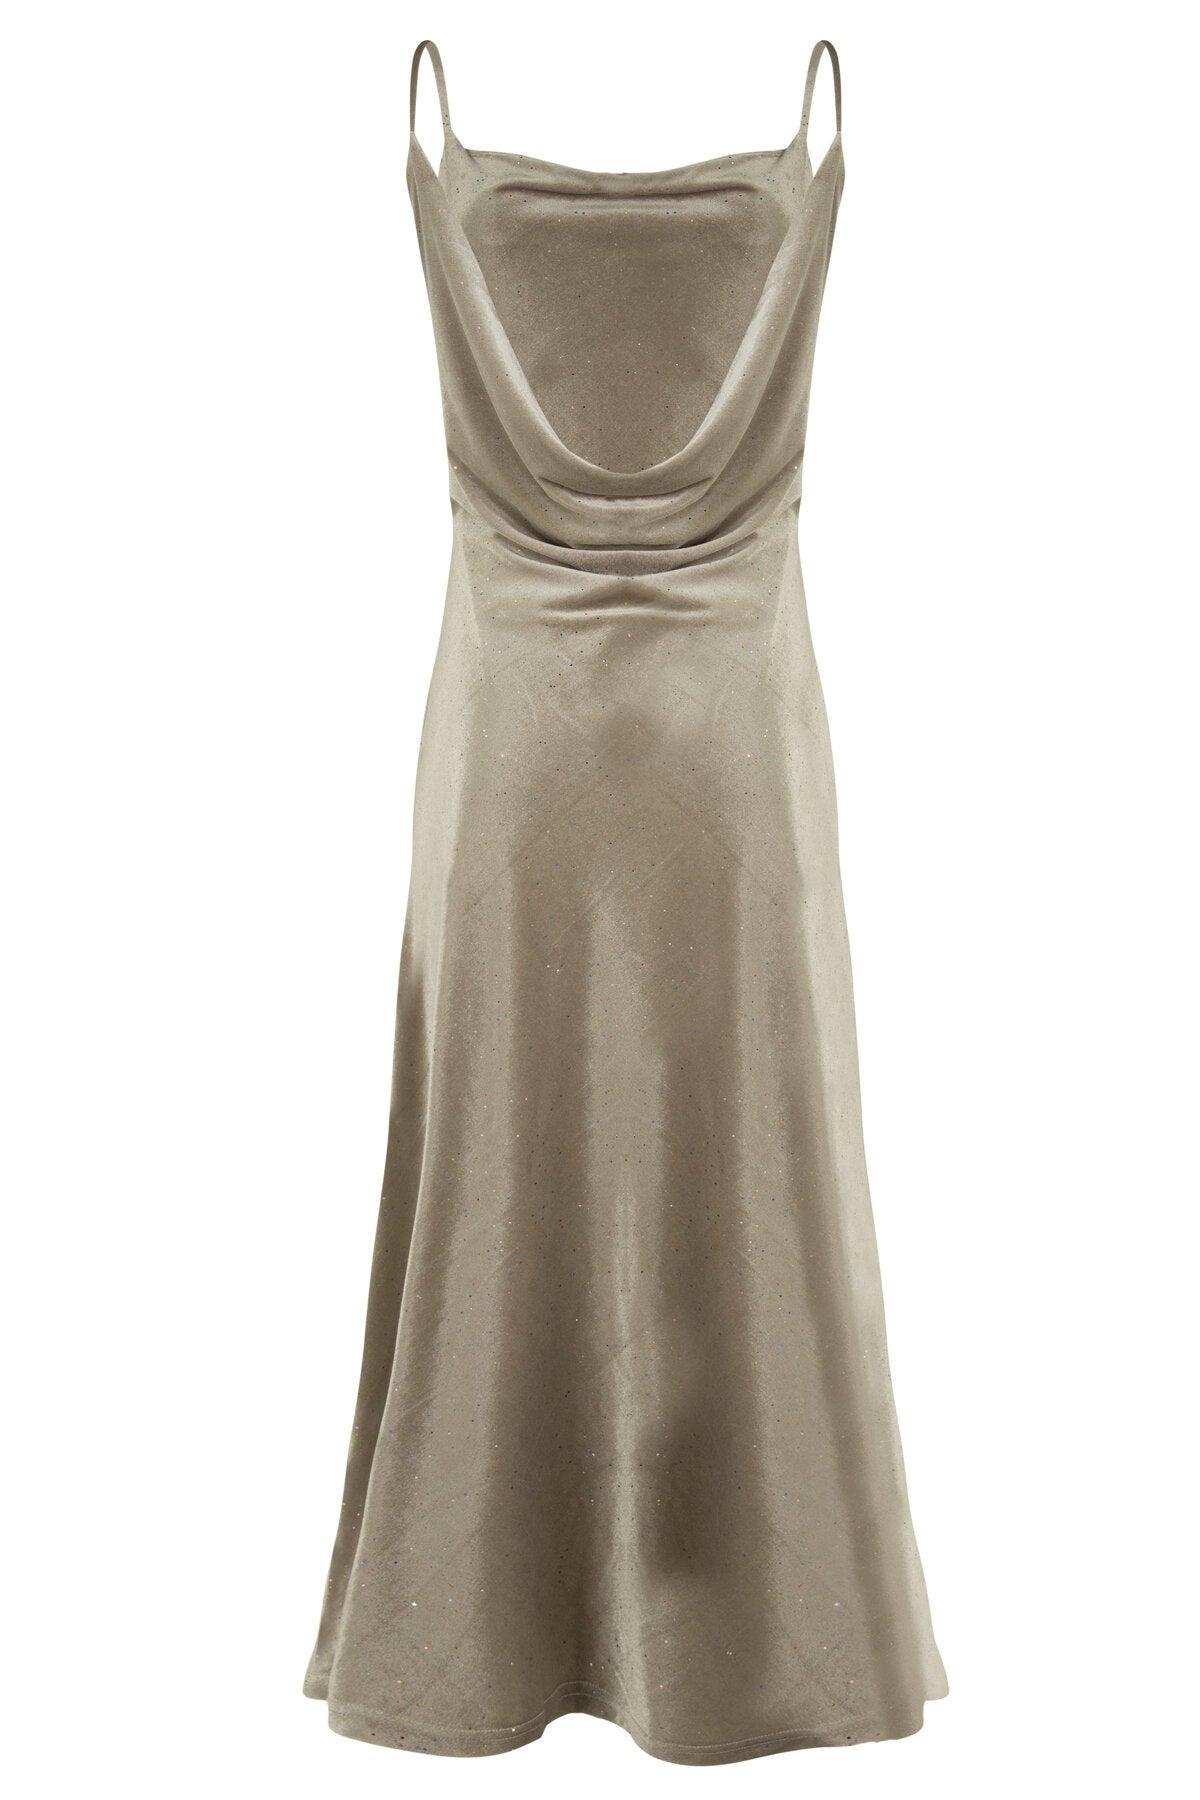 Coop - Do The Night Thing Dress - Silver